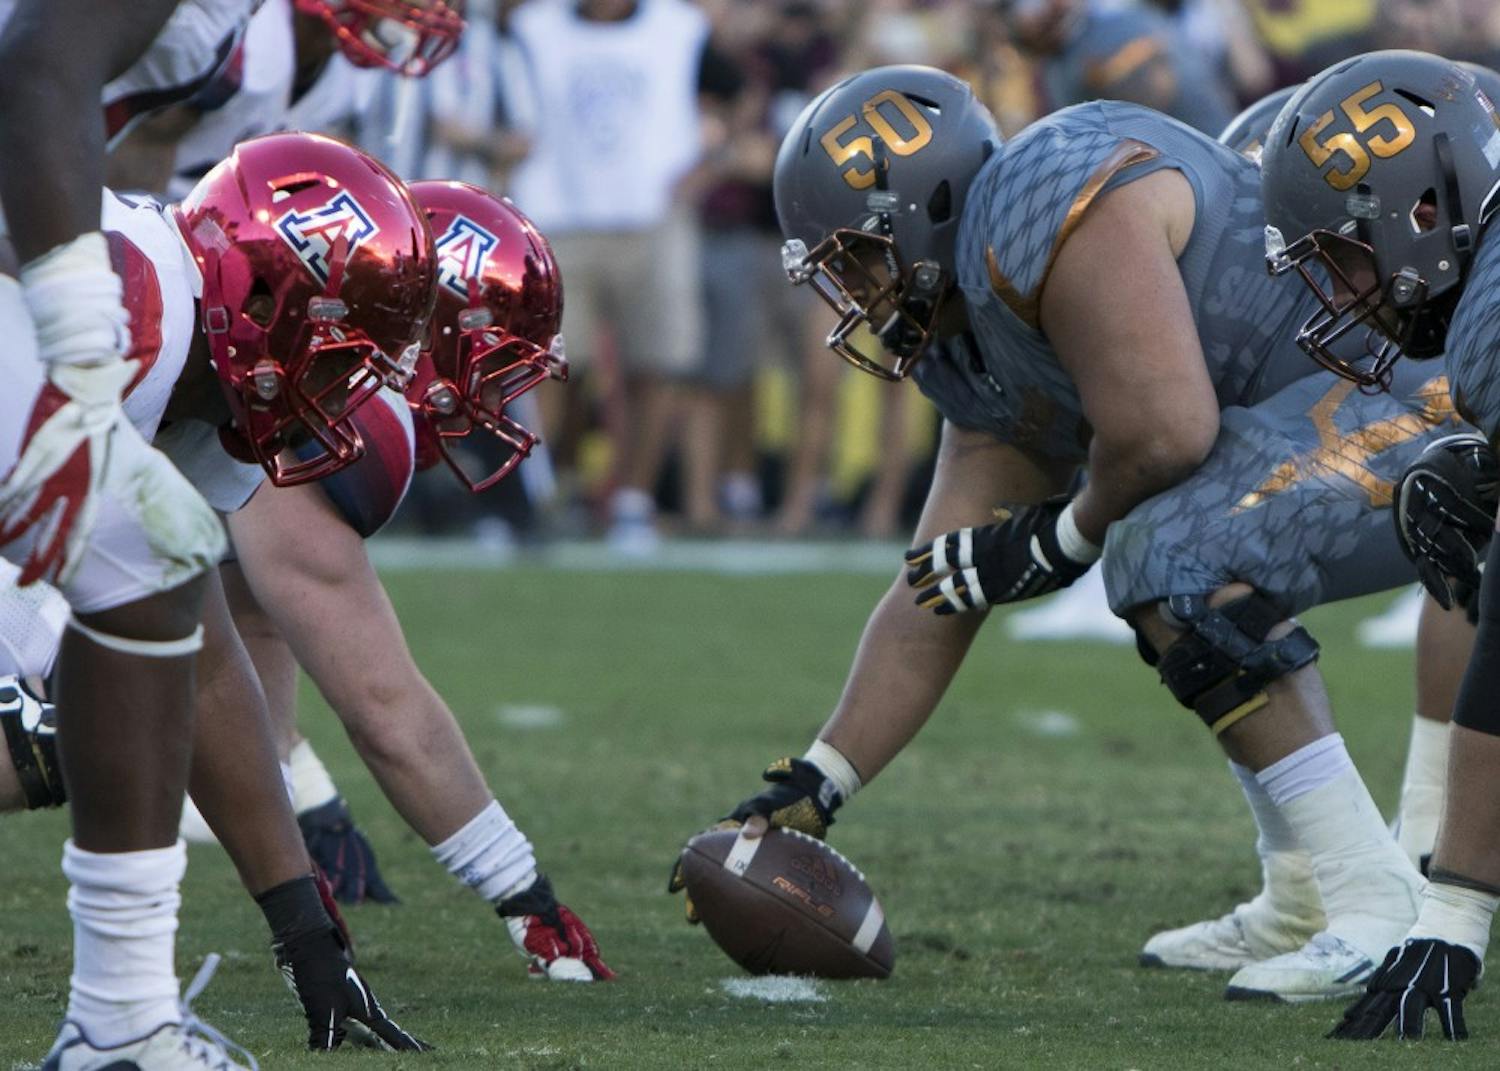 Senior offensive lineman Nick Kelly (50) gets ready to snap the ball in the fourth quarter against UA on Saturday, Nov. 21, 2015, at Sun Devil Stadium  in Tempe. The Sun Devils defeated the Wildcats 52-37. 